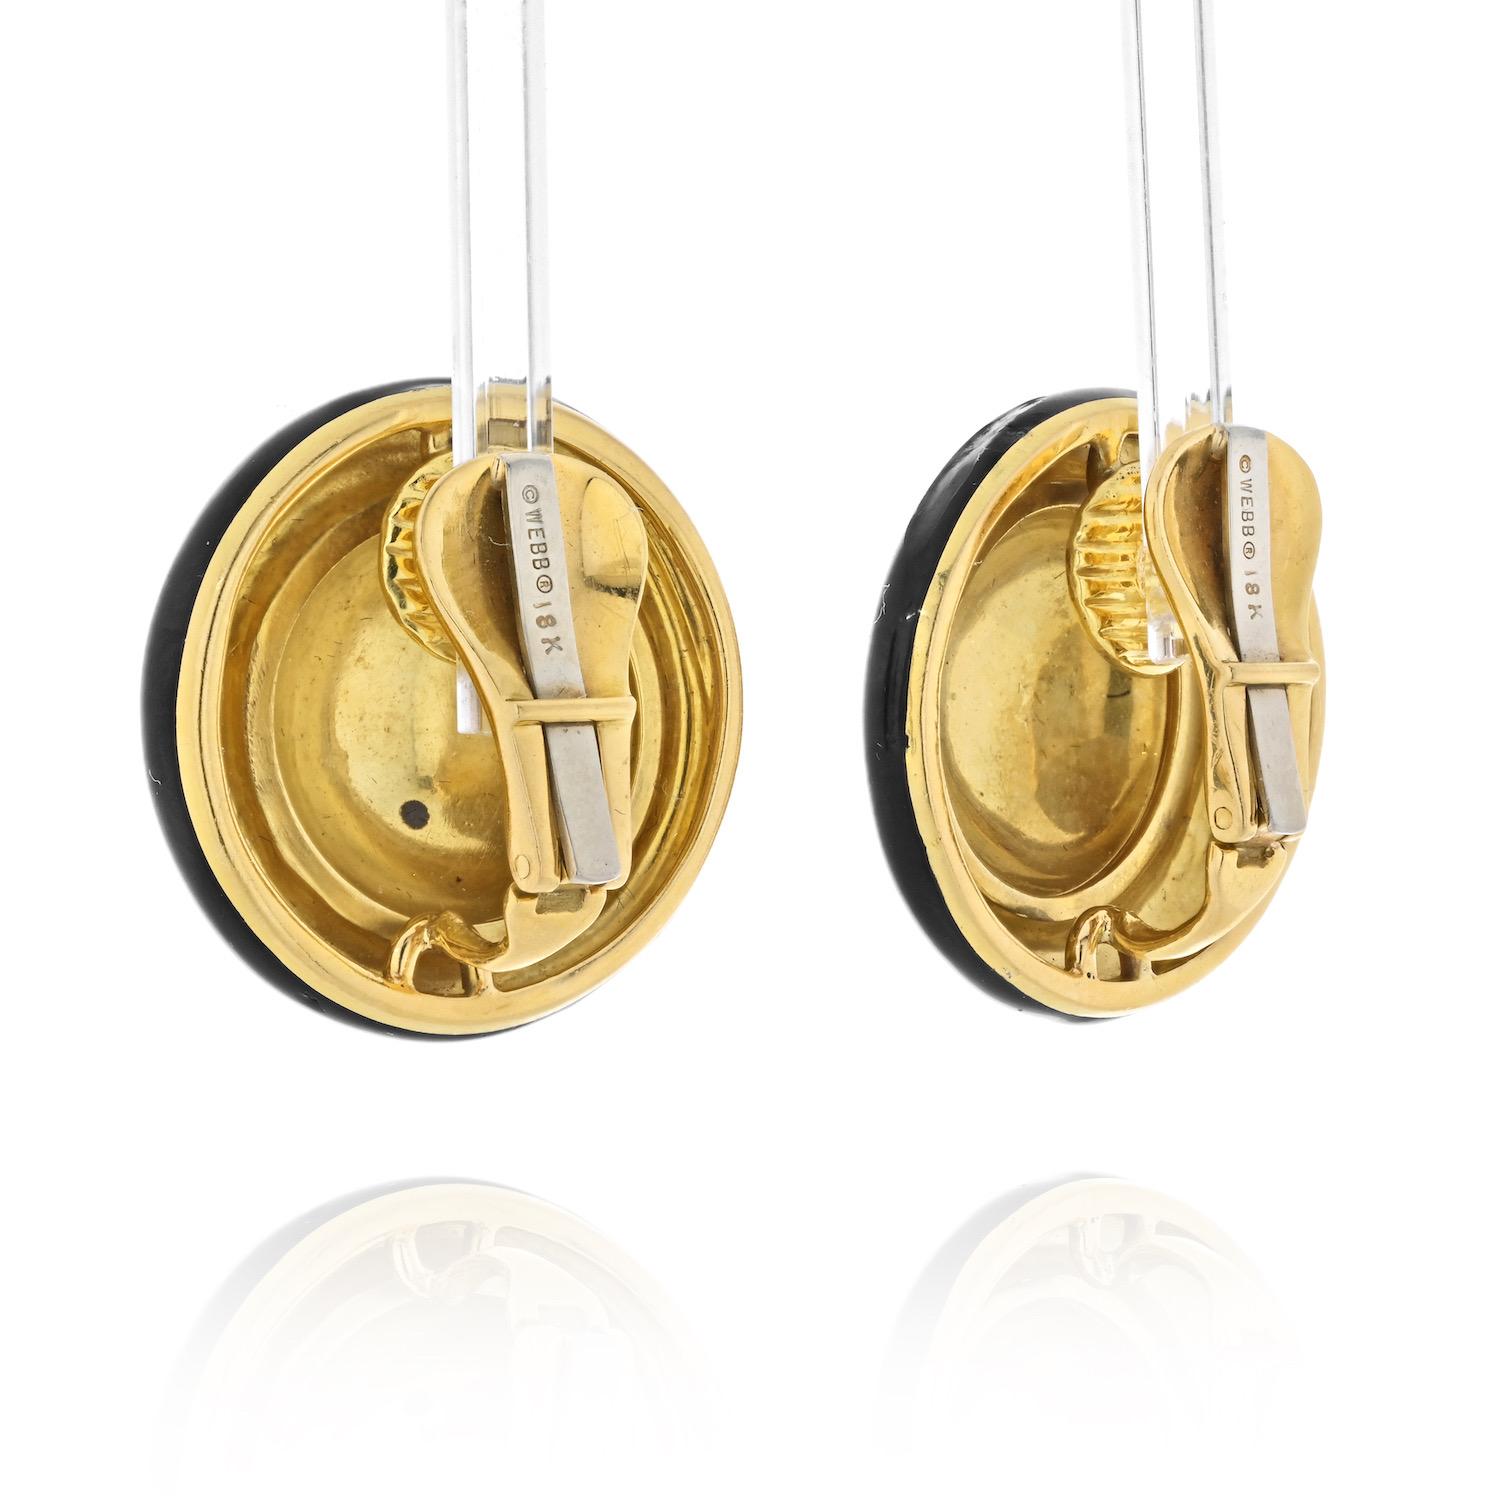 Lovely round button clip earrings by David Webb look timeless and chic at any age. These classics by David Webb have a hammered finish to the dome surface and a high polish to the outter rim. These earrings measure exactly 1 inch wide. Clip on